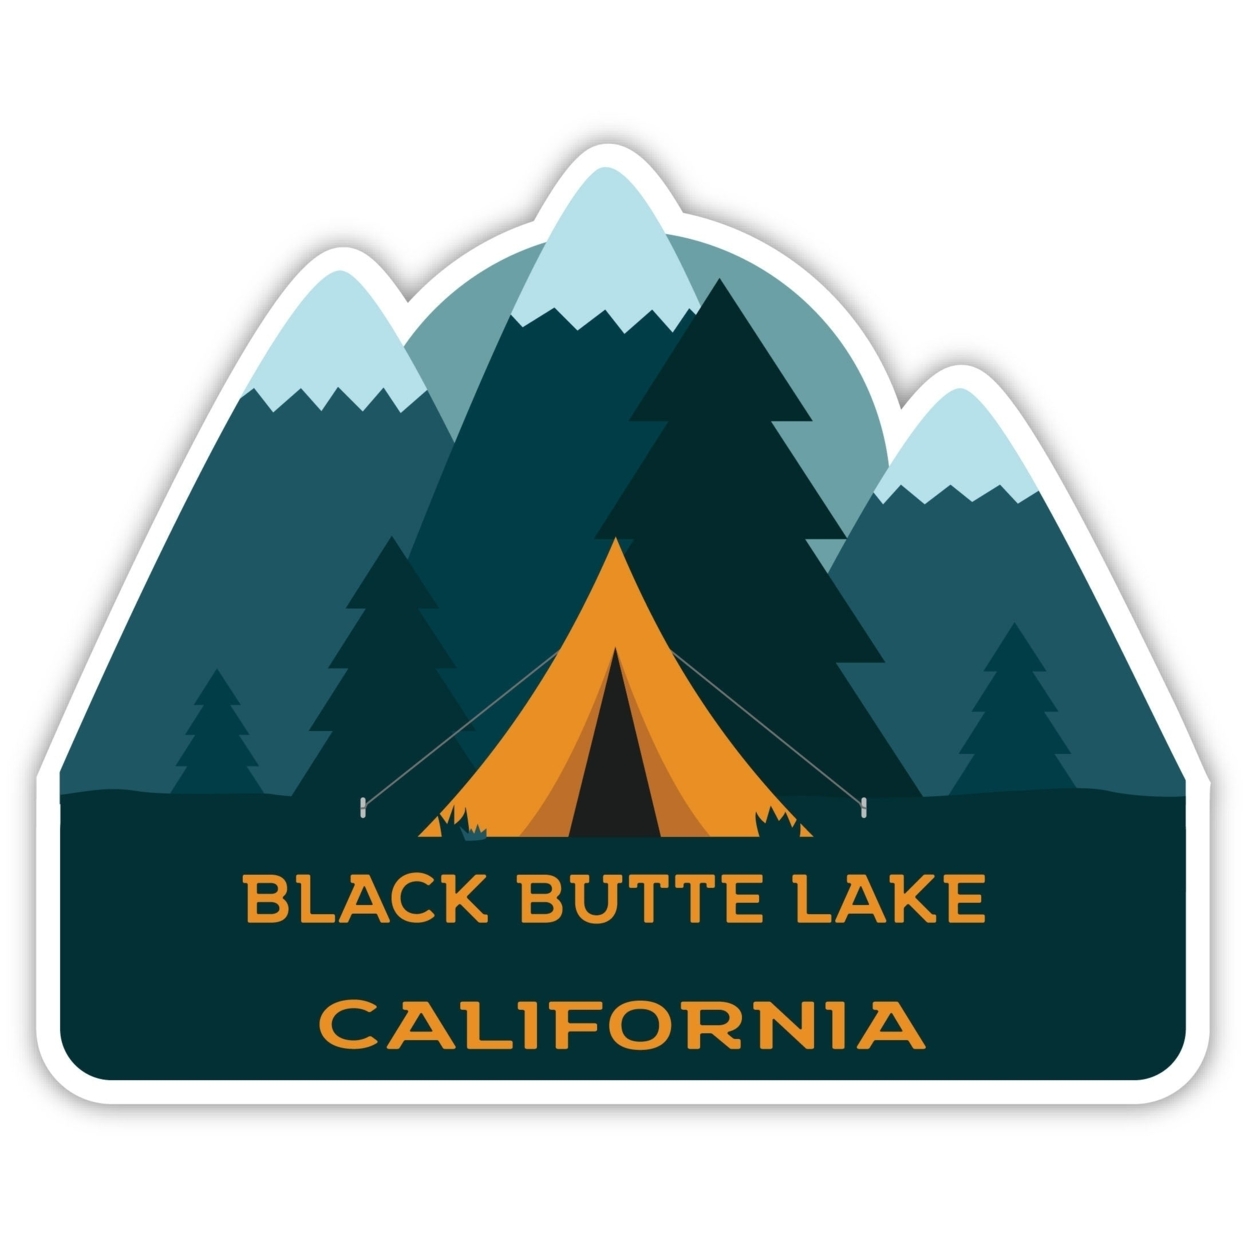 Black Butte Lake California Souvenir Decorative Stickers (Choose Theme And Size) - 4-Pack, 6-Inch, Tent